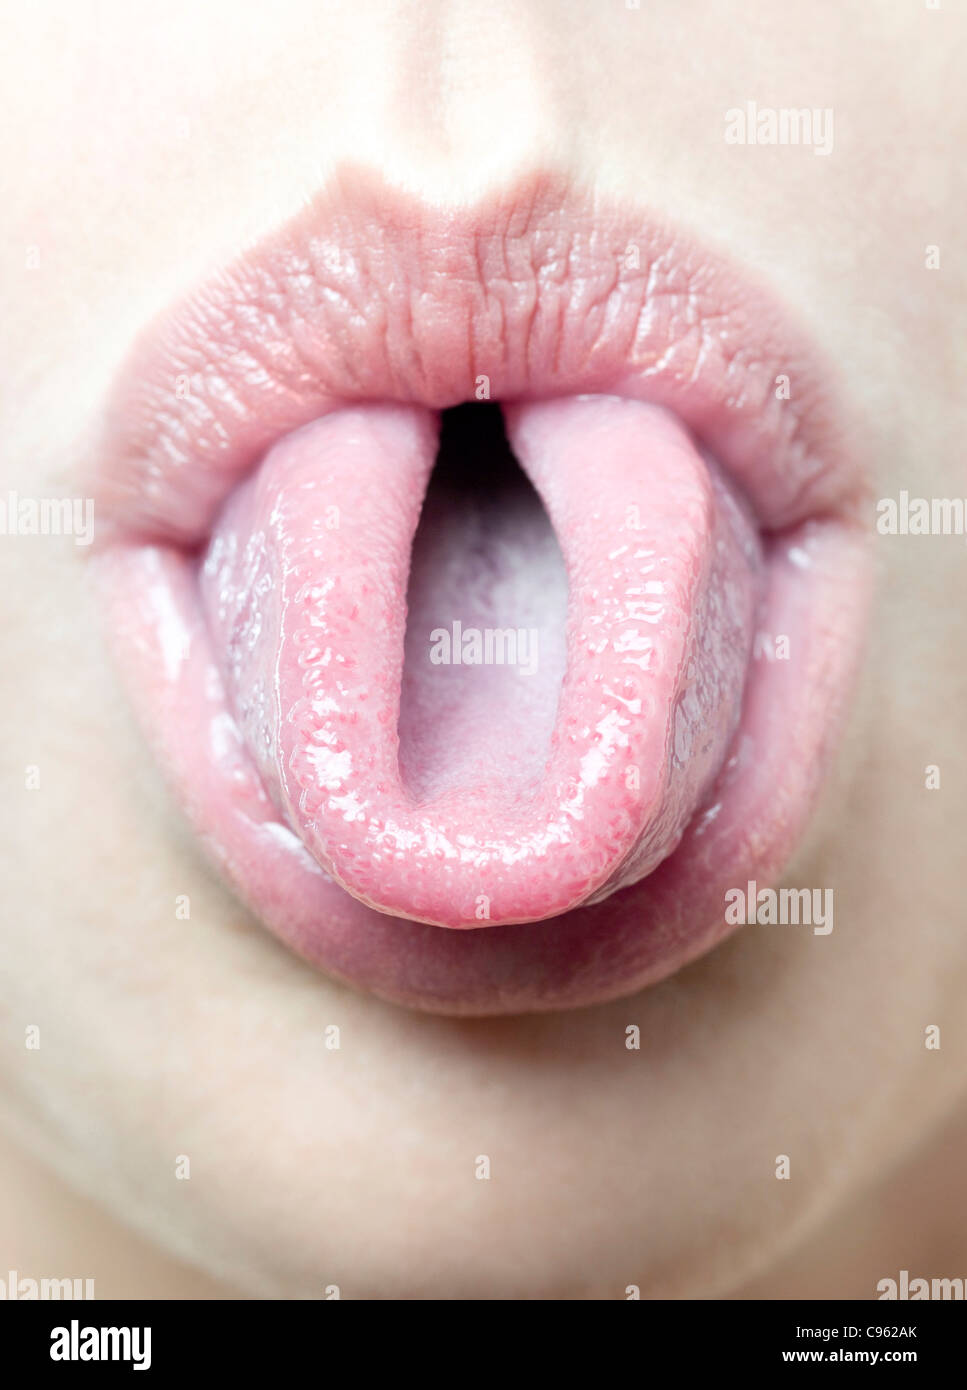 Woman rolling her tongue. Stock Photo